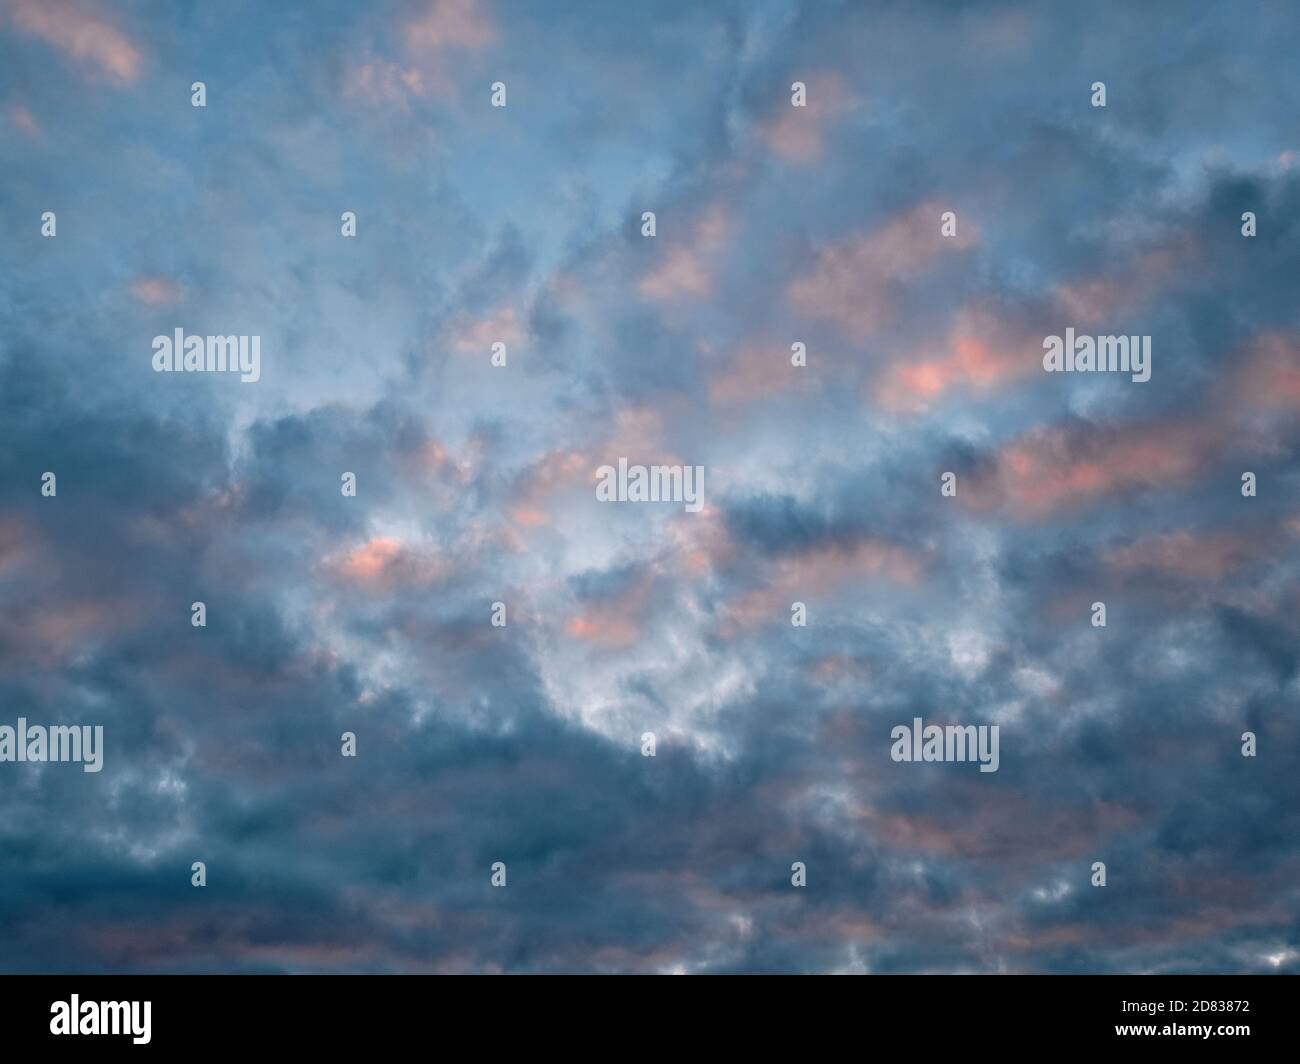 Abstract image of pink and orange clouds against a blue sky at sunset. Stock Photo